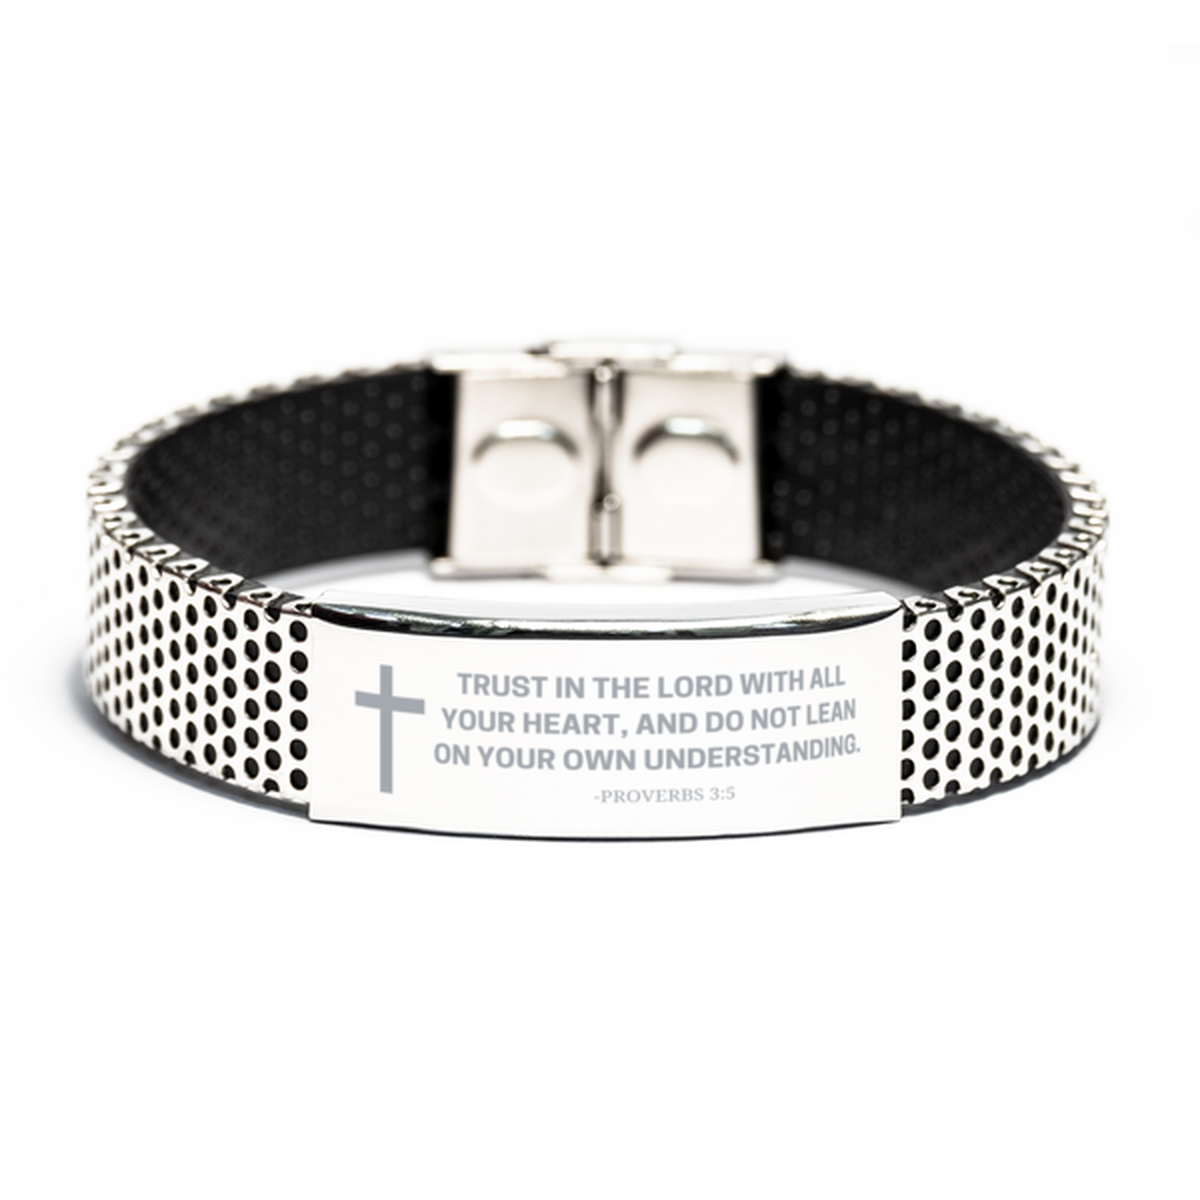 Baptism Gifts For Teenage Boys Girls, Christian Bible Verse Stainless Steel Bracelet, Trust in the Lord with all your heart, Catholic Confirmation Gifts for Son, Godson, Grandson, Nephew